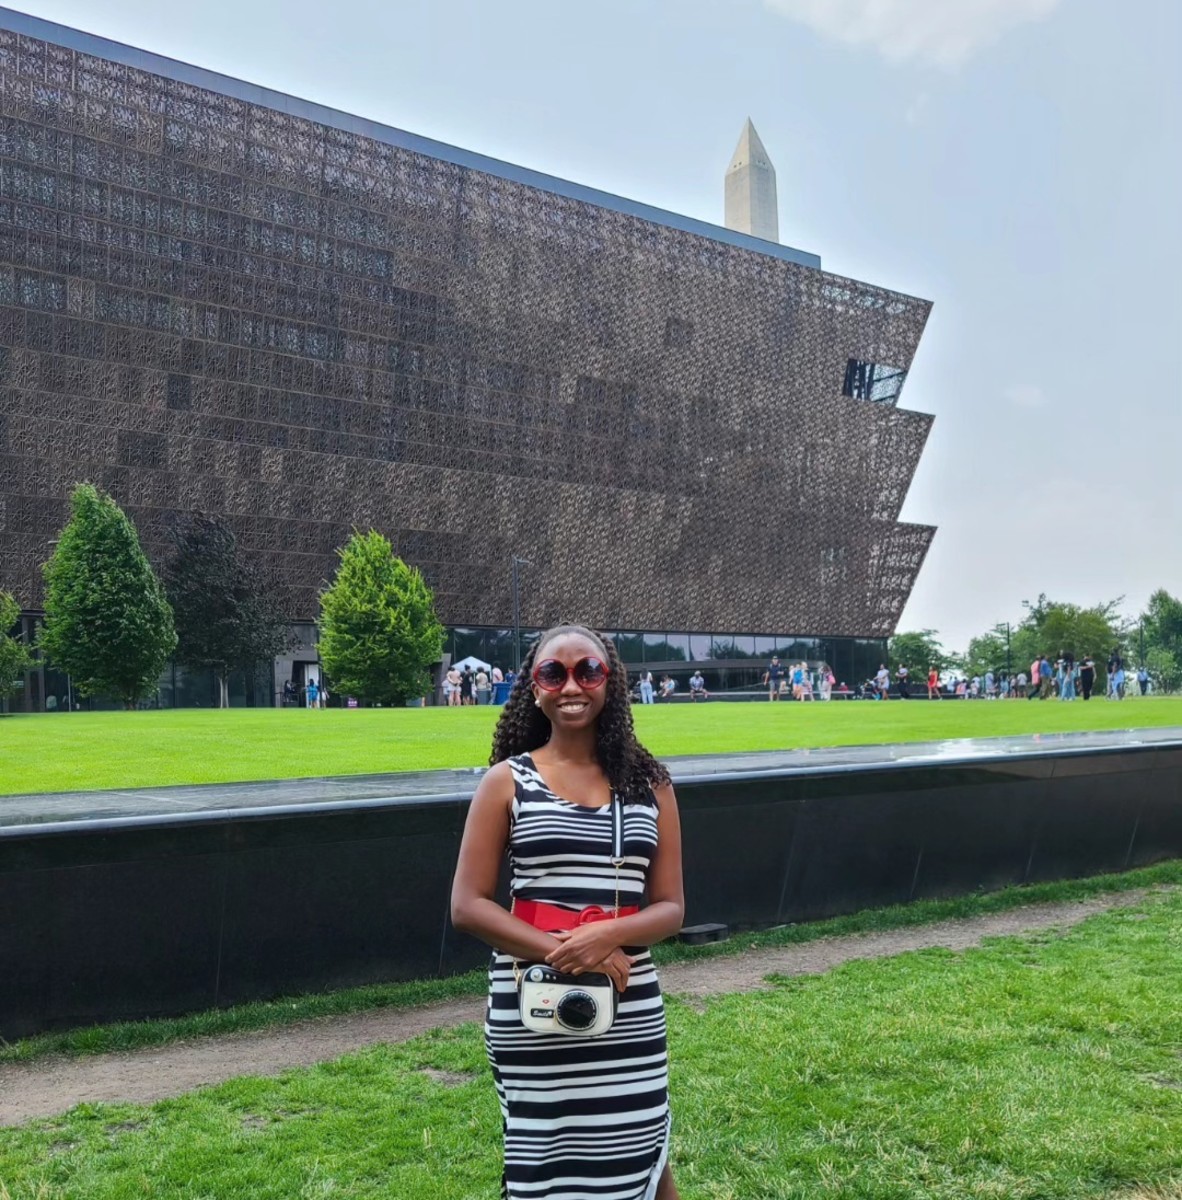 Touring the National Museum of African American History and Culture